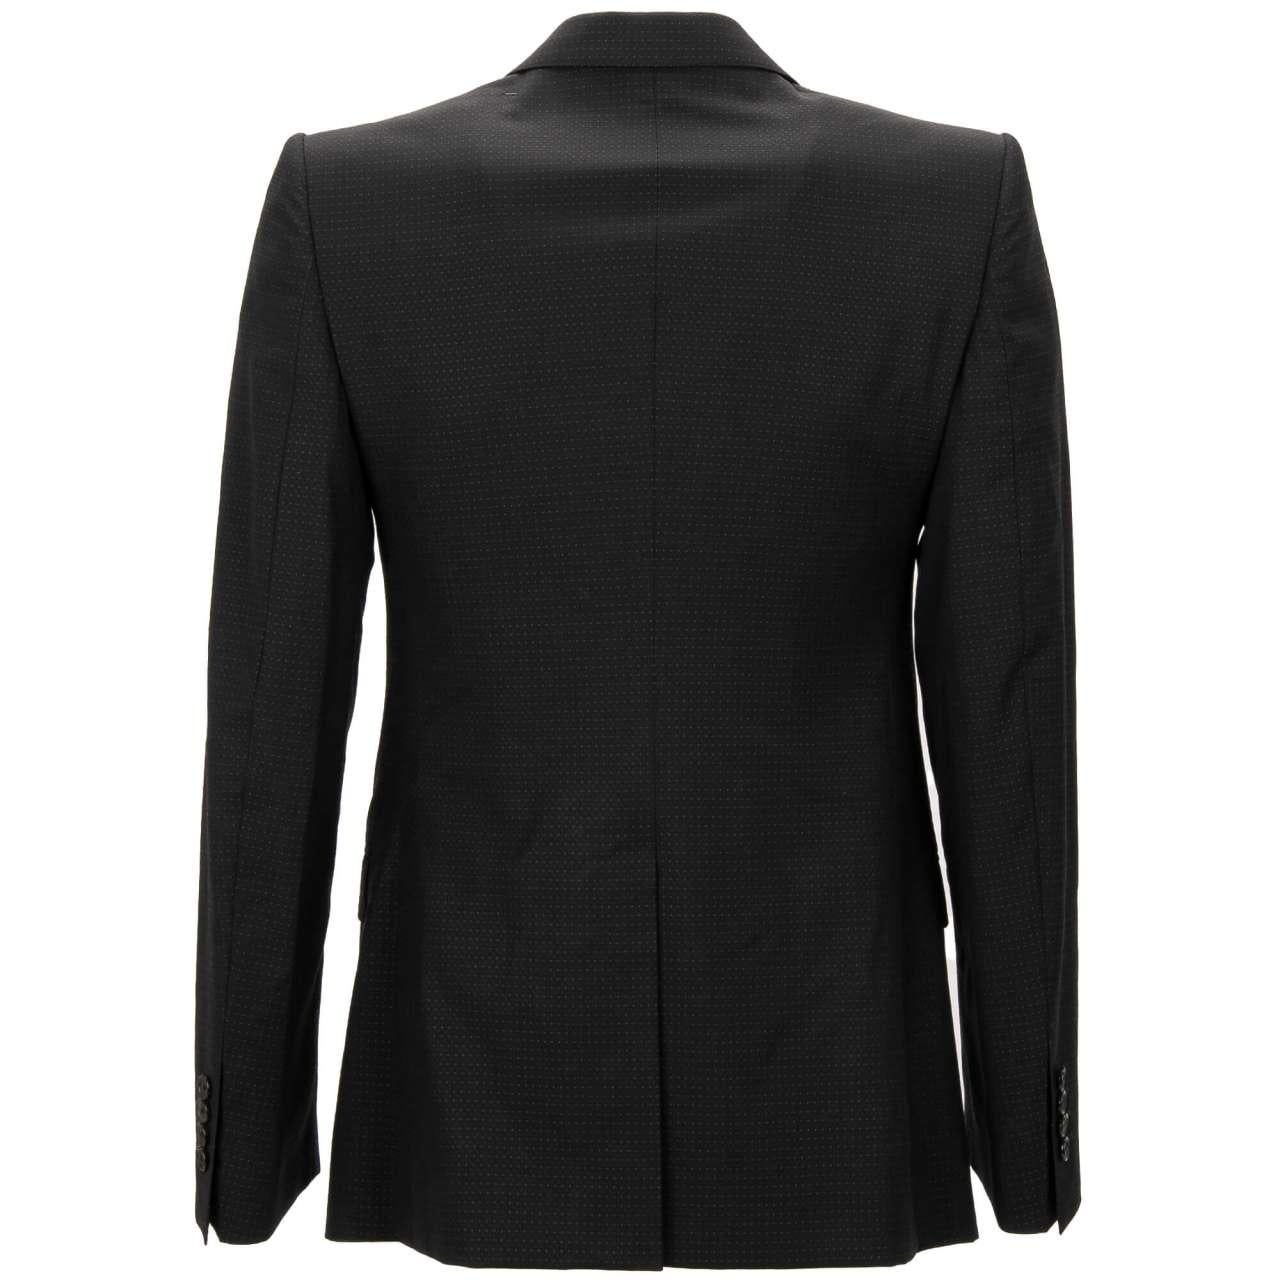 - Exclusive double-breasted virgin wool Jacket / Blazer and Vest Ensemble with embroidered DG logo and crowns in black by DOLCE & GABBANA - SICILIA Line - MADE IN ITALY - New with Tag - Slim Fit - Model: IK4JMZ-FJ2BB-N0000 - Material: 100% Virgin